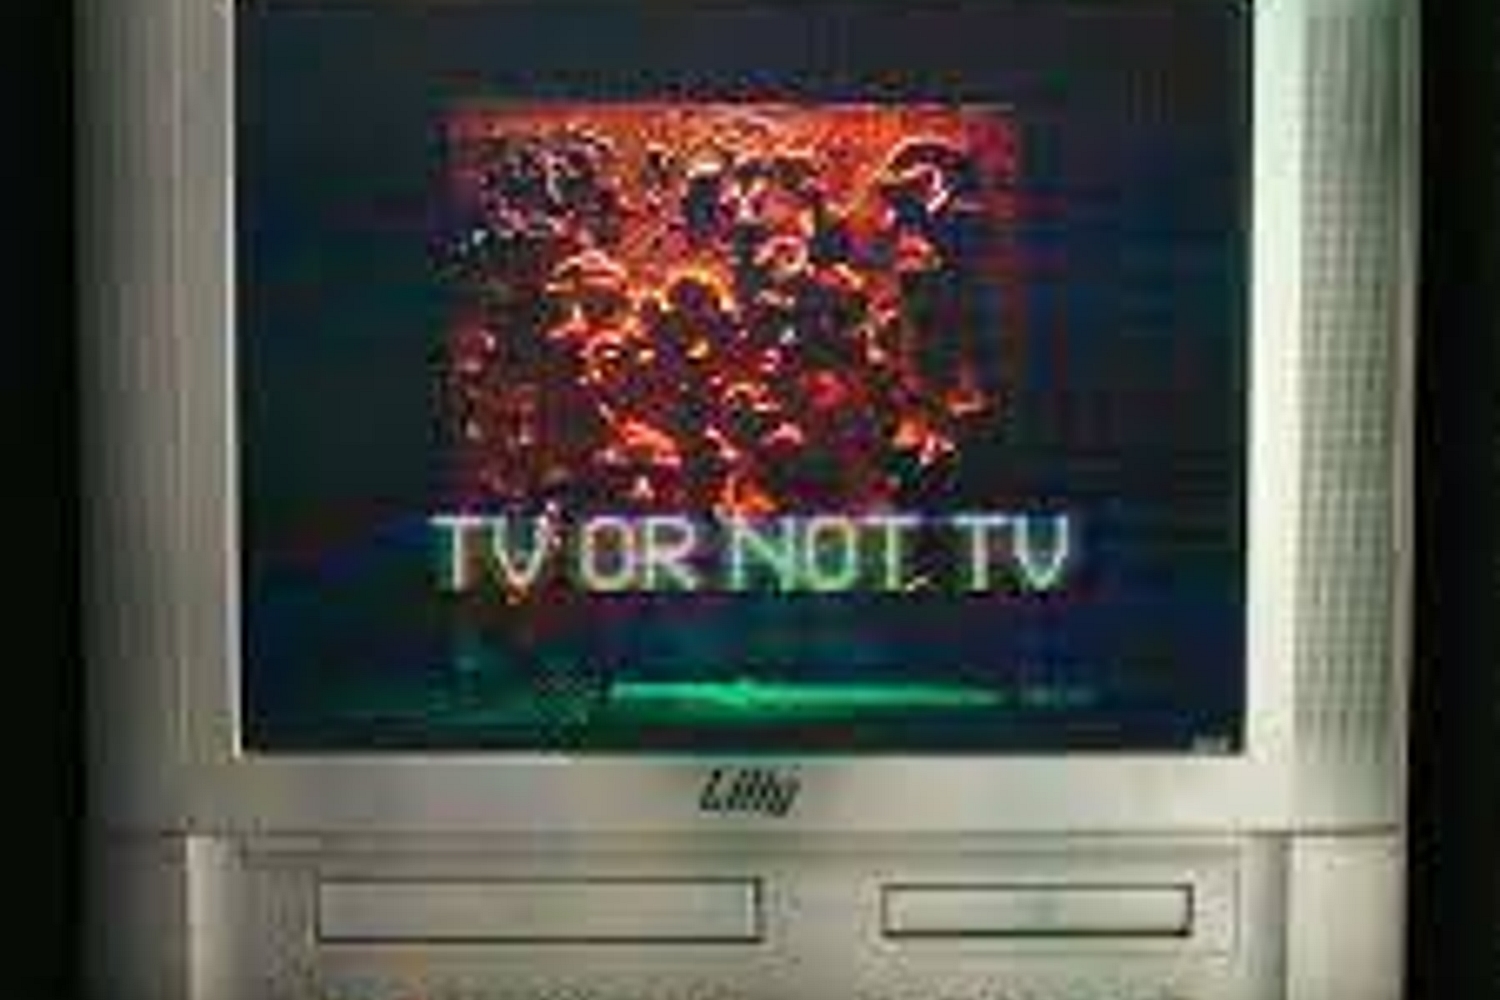 Liily - TV Or Not TV